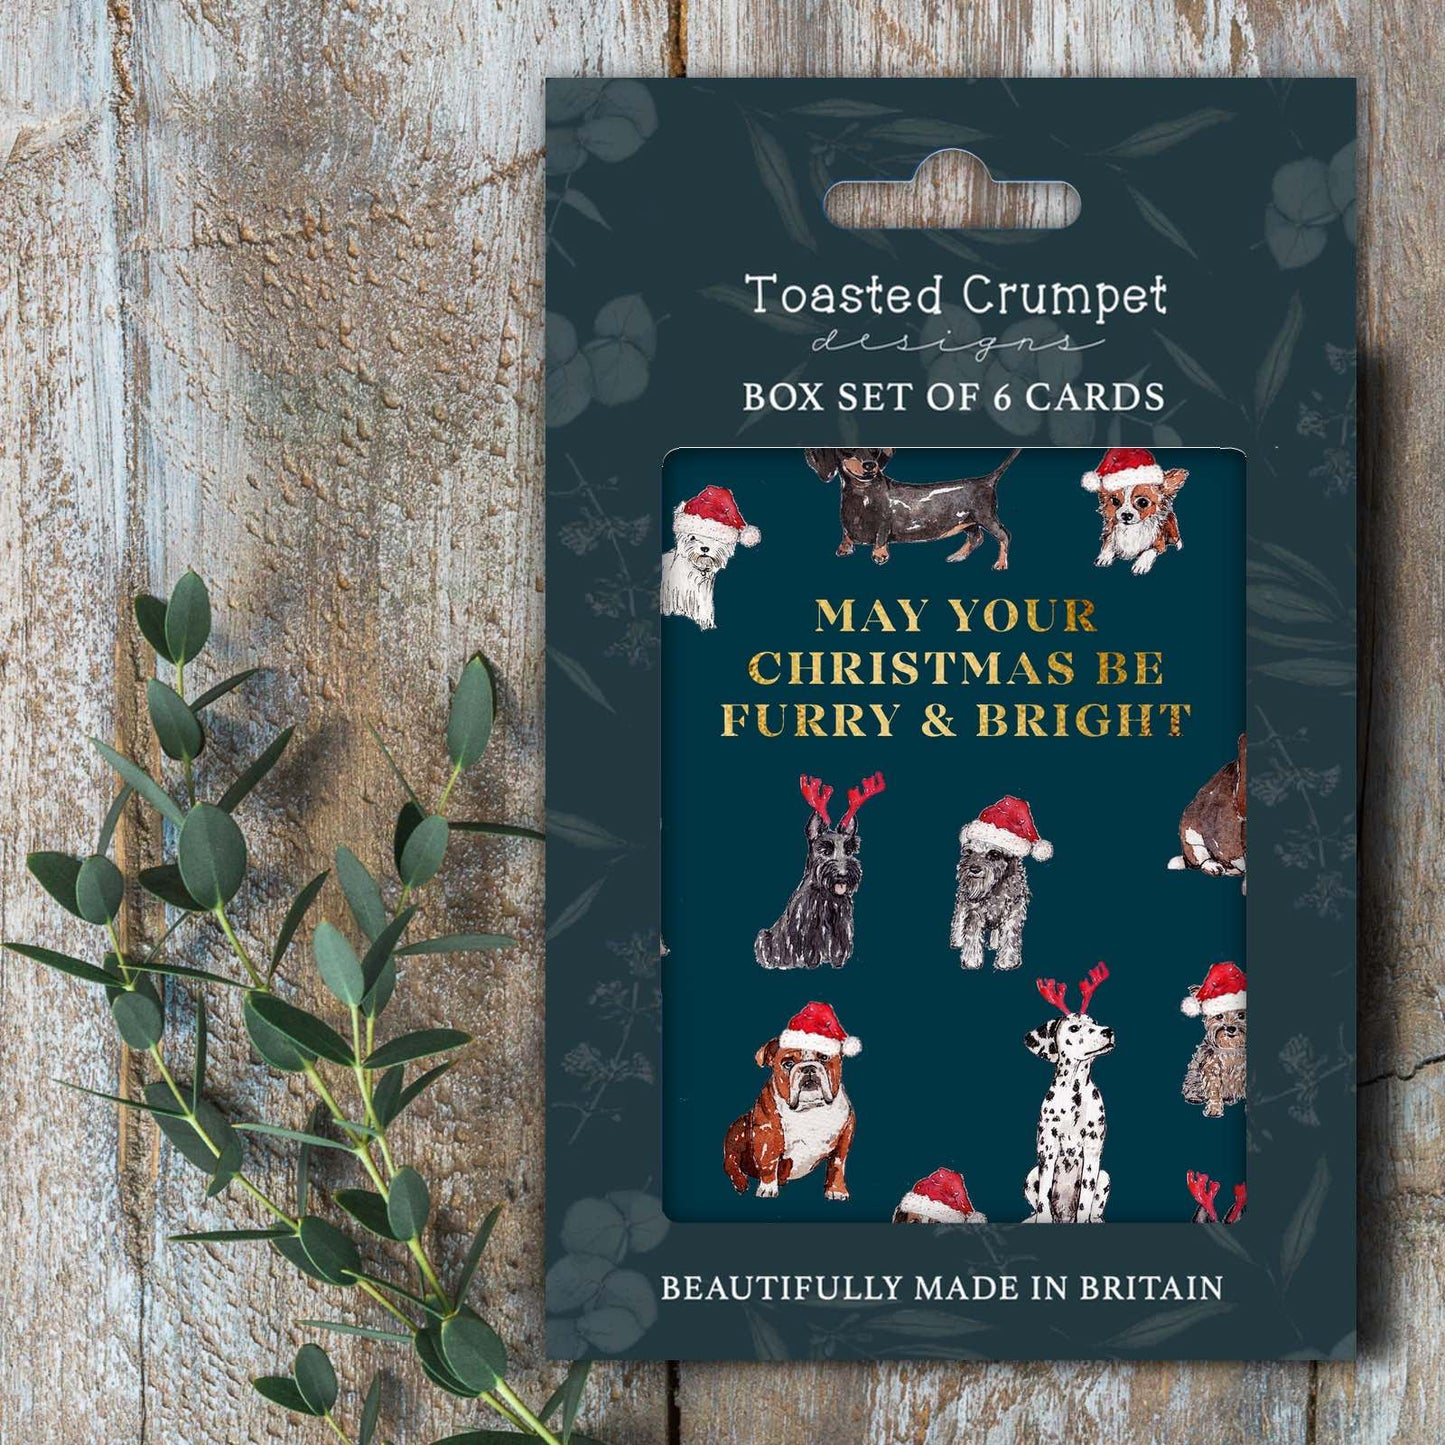 Toasted Crumpet Furry and Bright Box Set of 6 Cards